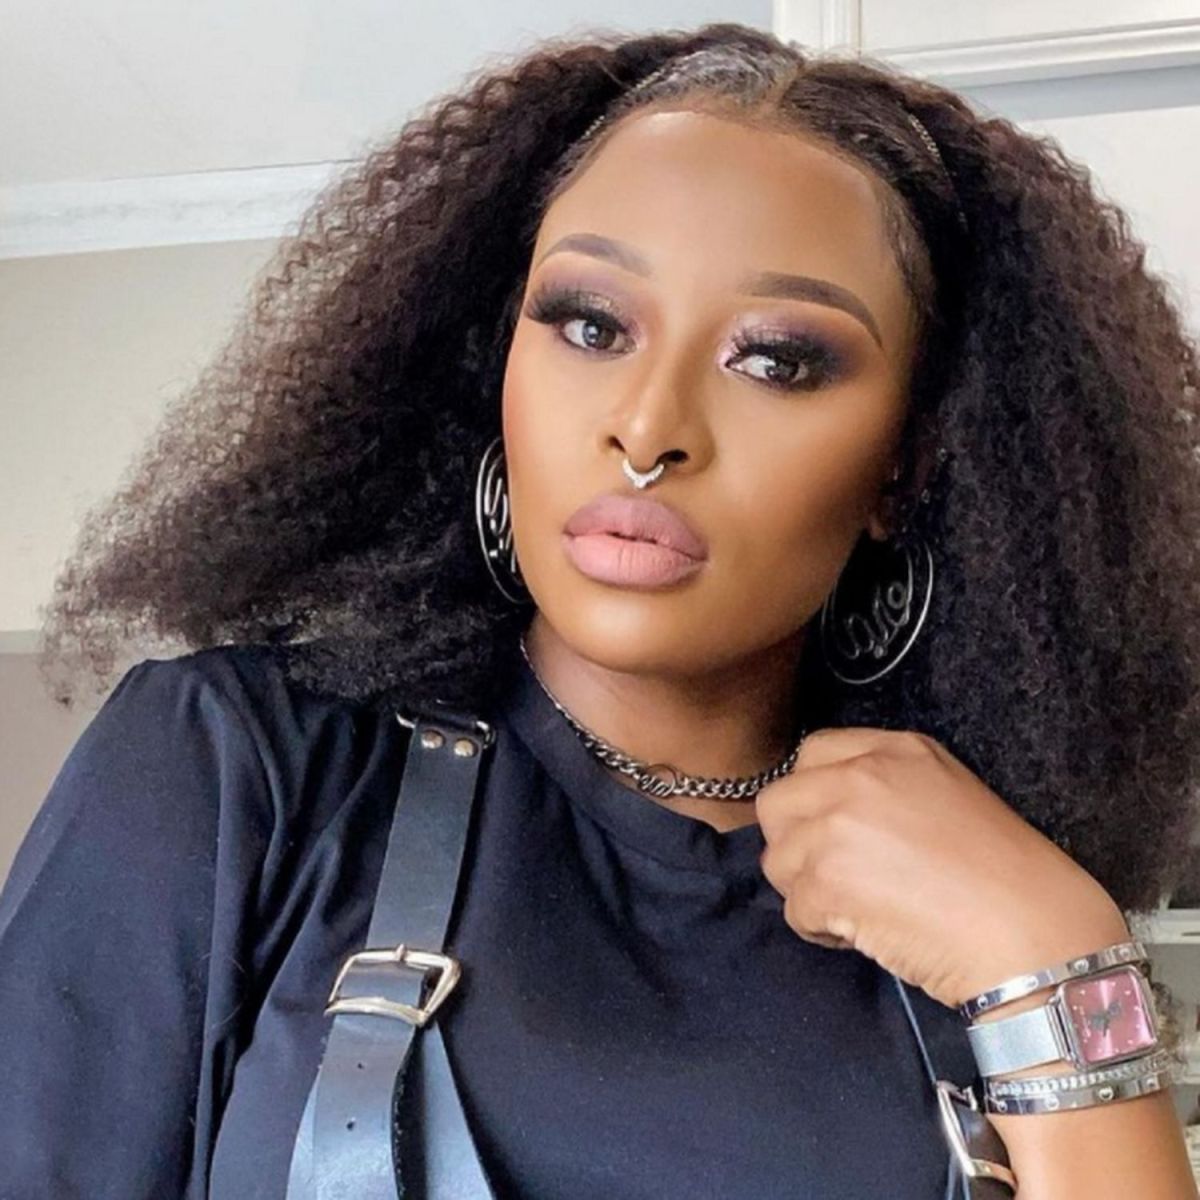 Dj Zinhle Reacts To Backlash Over Not Knowing How To Cook 8